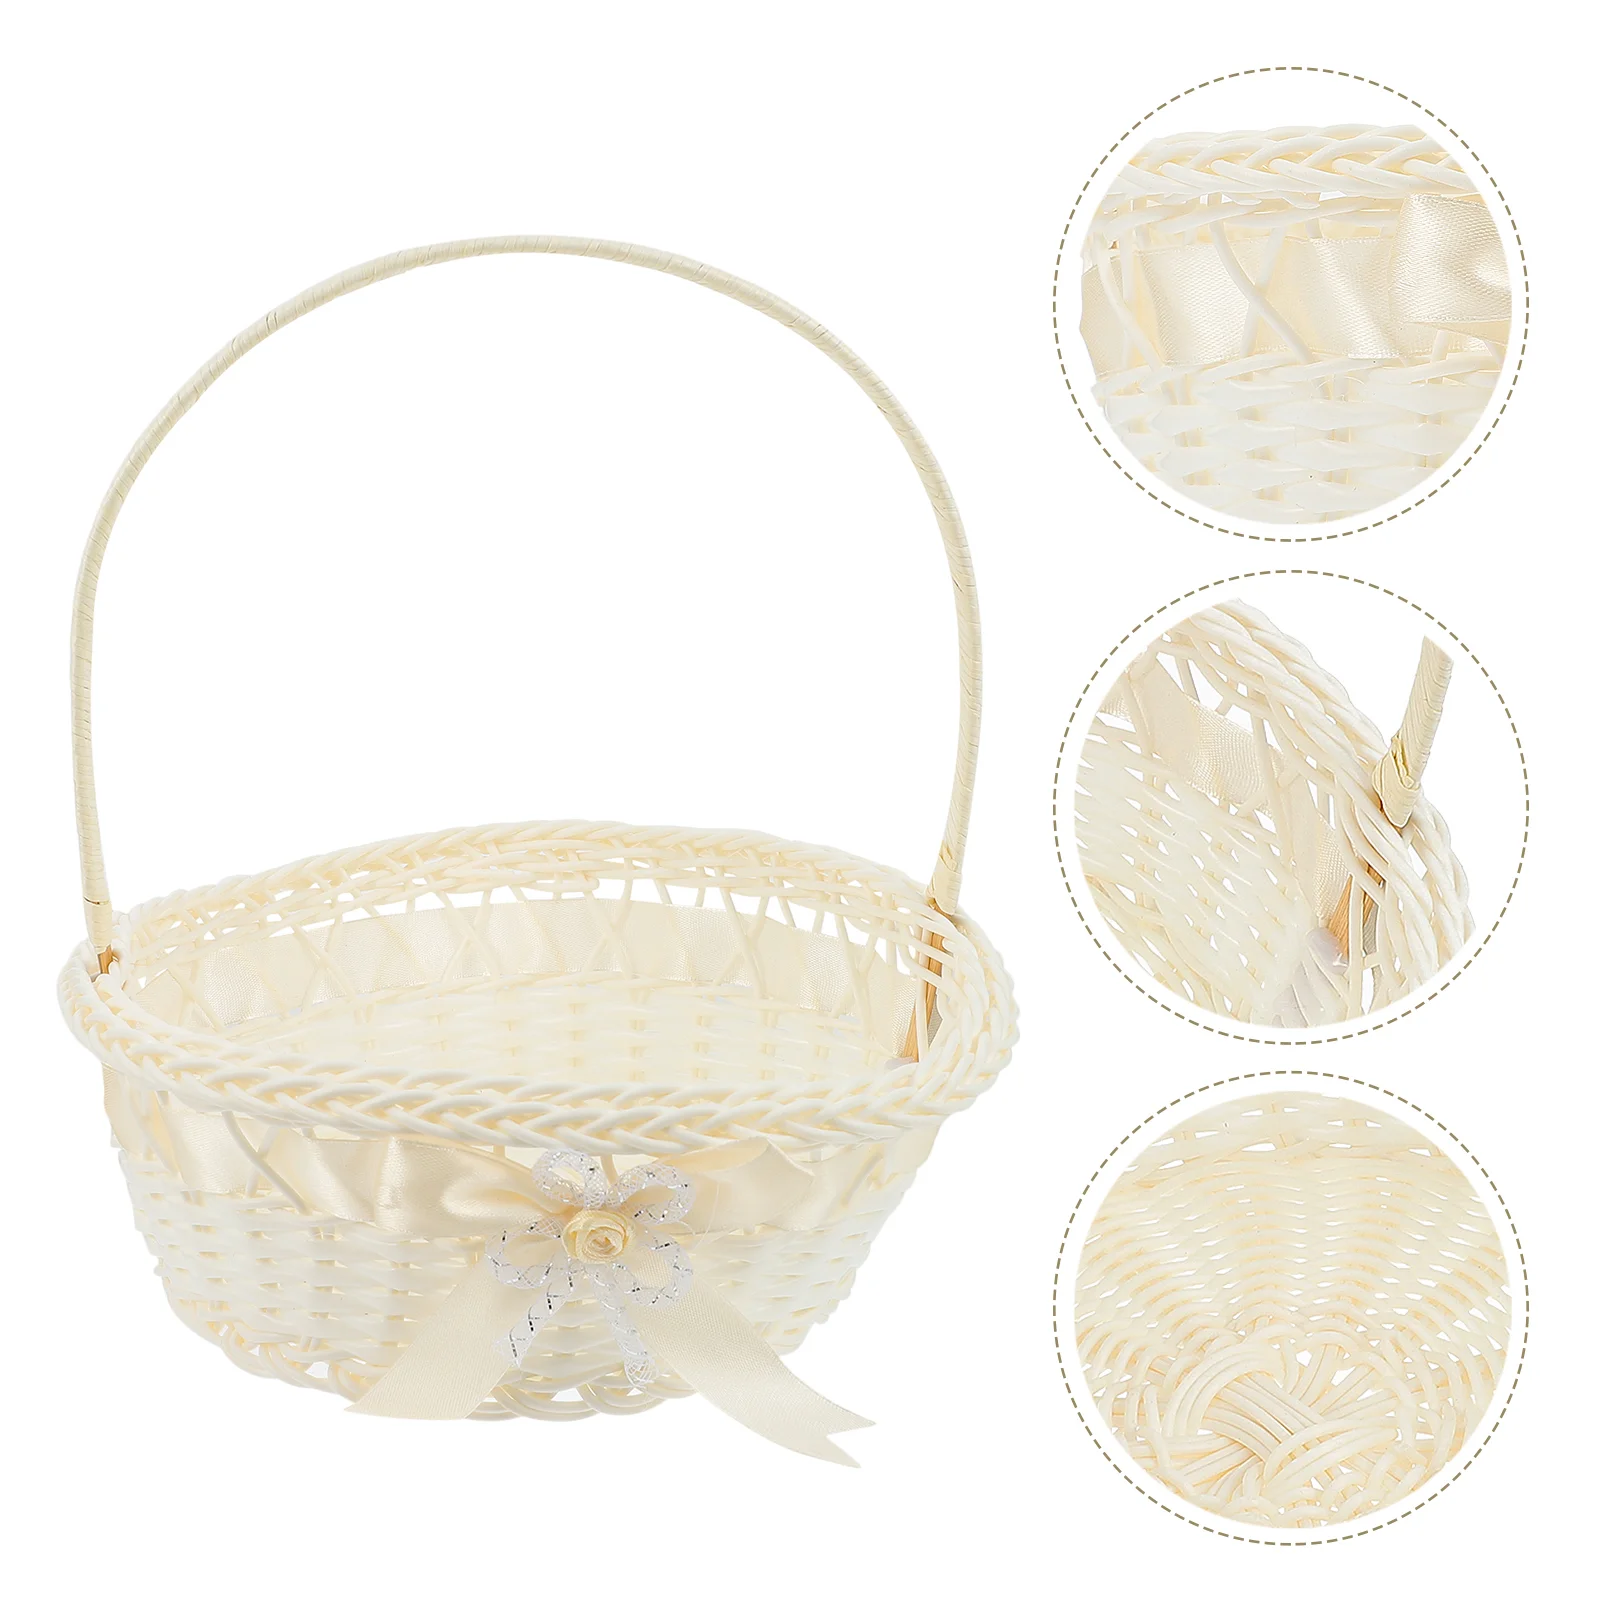 

Basket Flower Wedding Girl Wicker Storage Candy Baskets Picnic Woven Party Petal Rustic Gift Table Linen Vintage Centerpiece